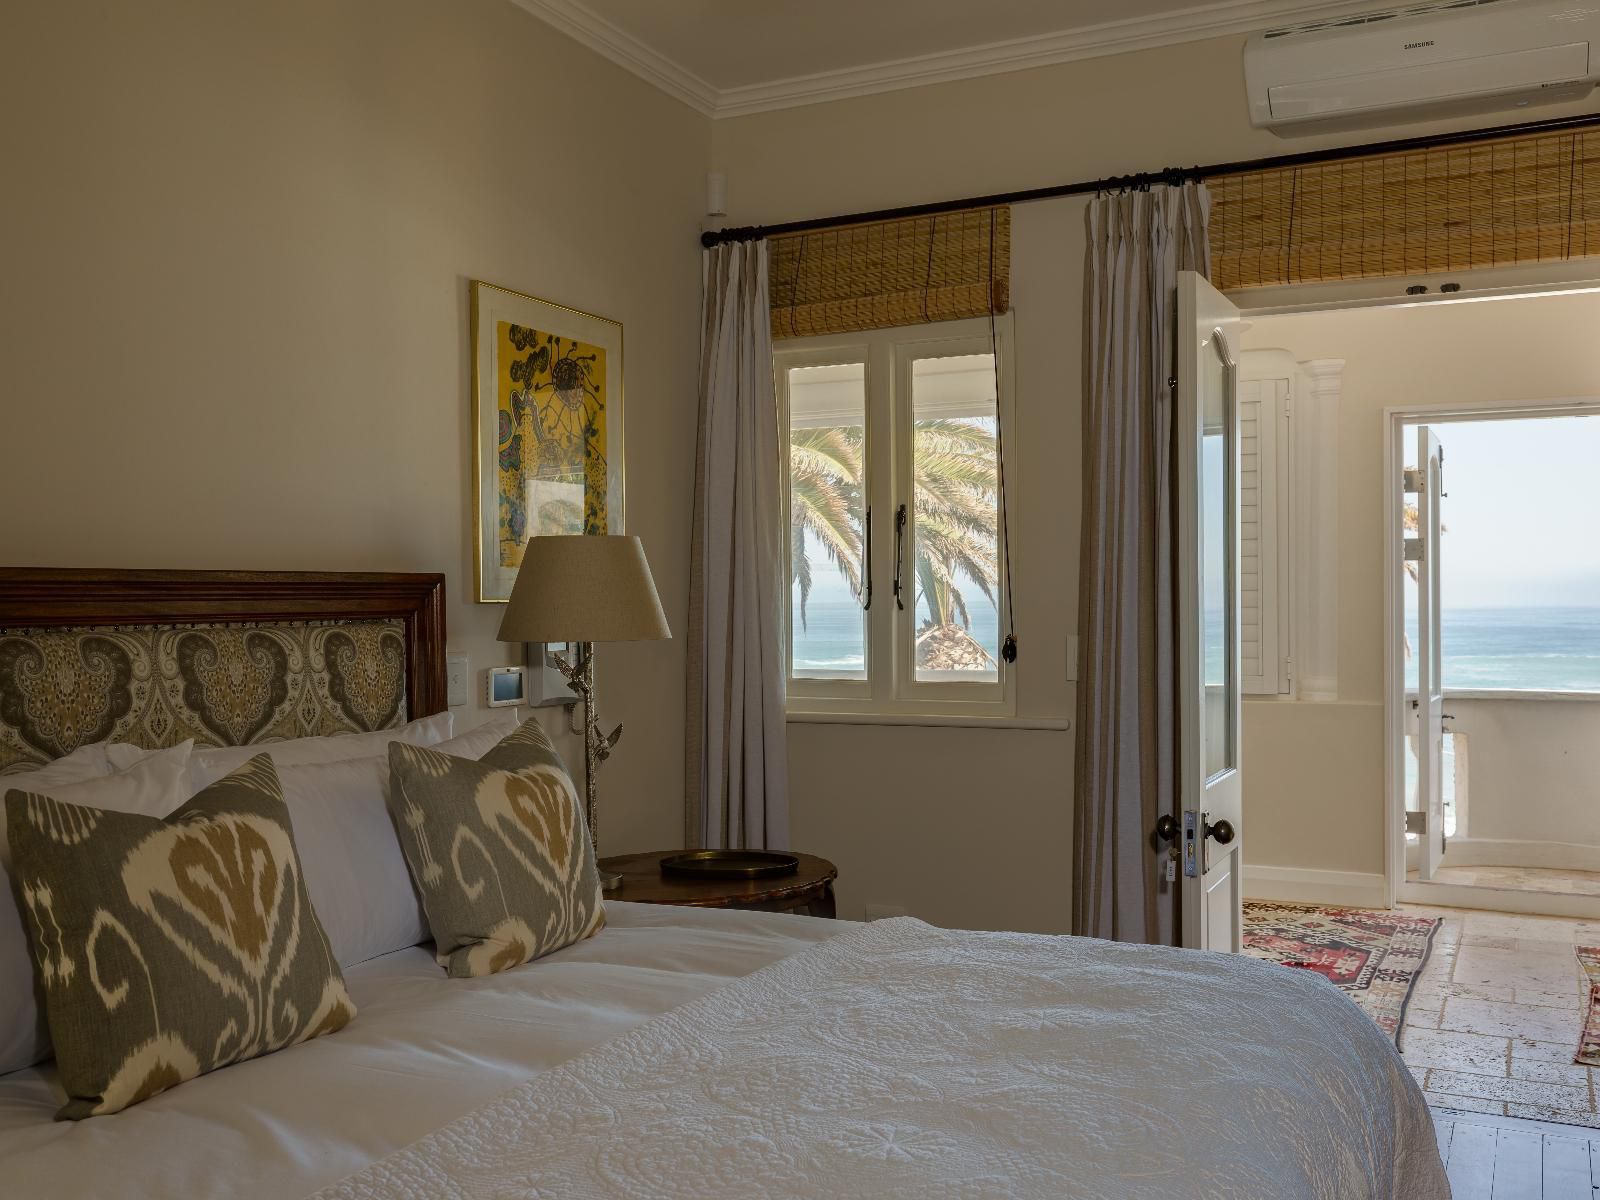 Claybrook Camps Bay Cape Town Western Cape South Africa Bedroom